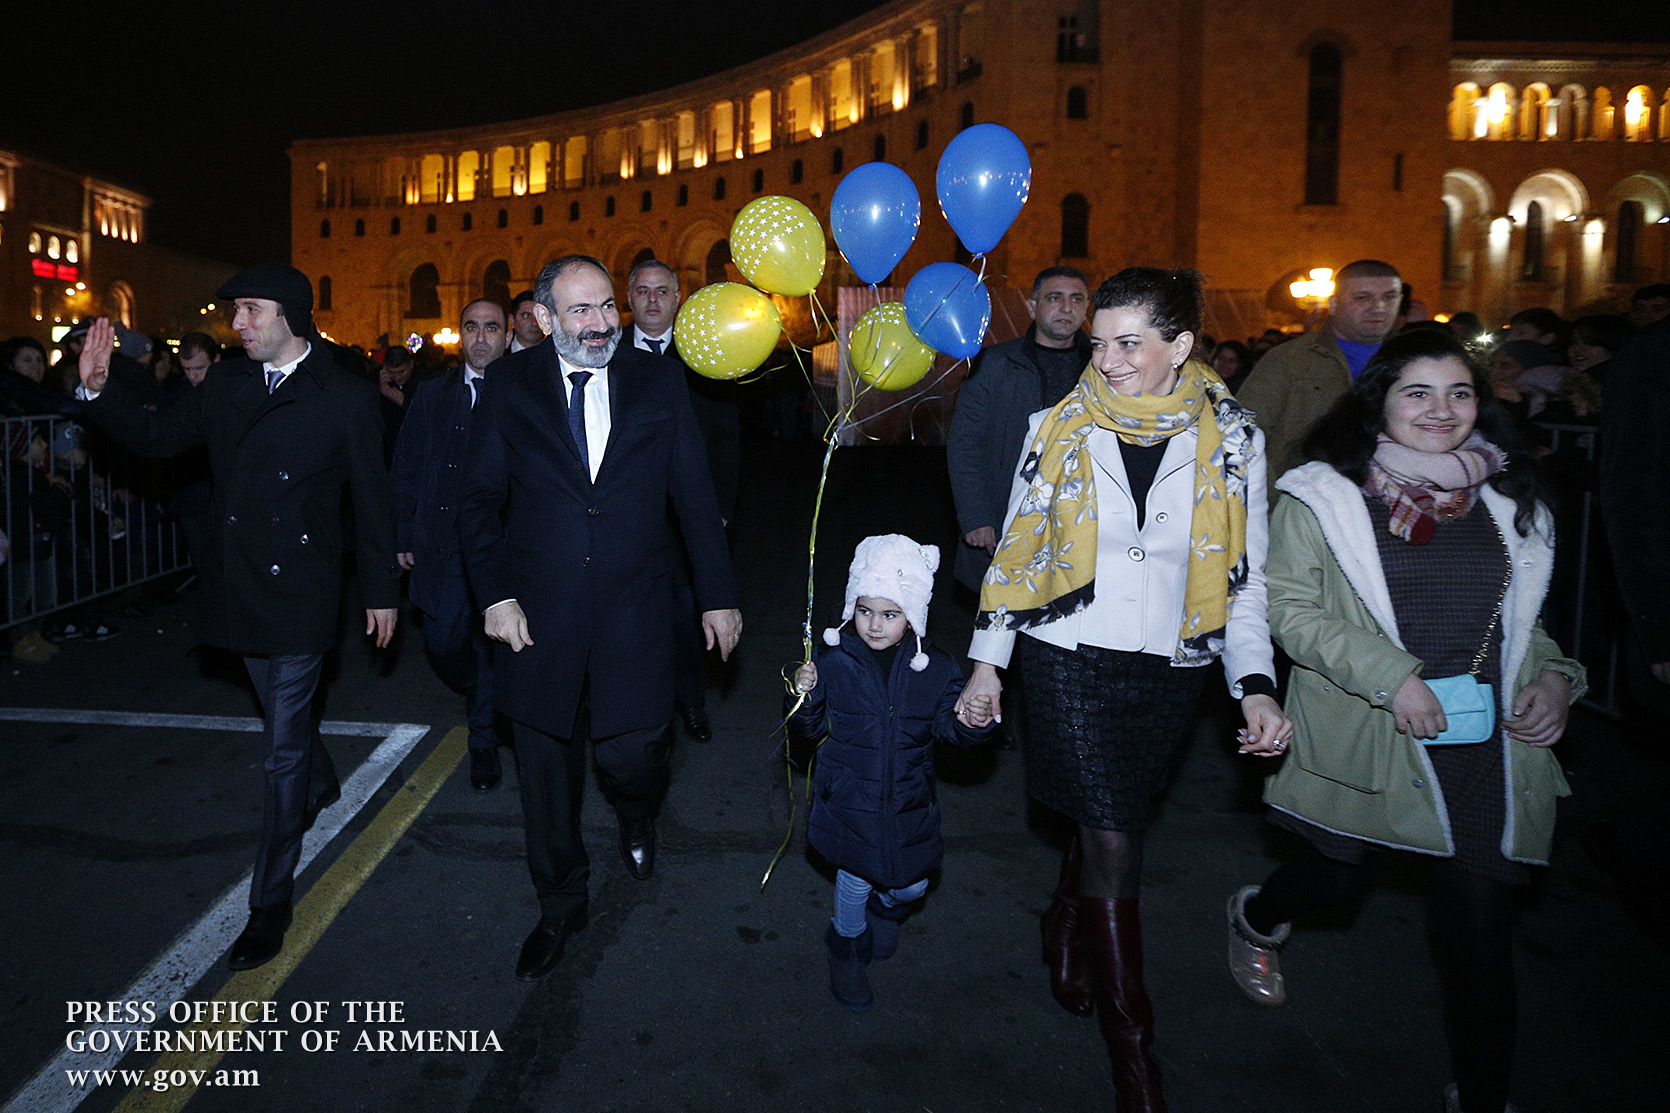 Accompanied by his family members, Nikol Pashinyan attends central Christmas tree’s lighting ceremony in Yerevan